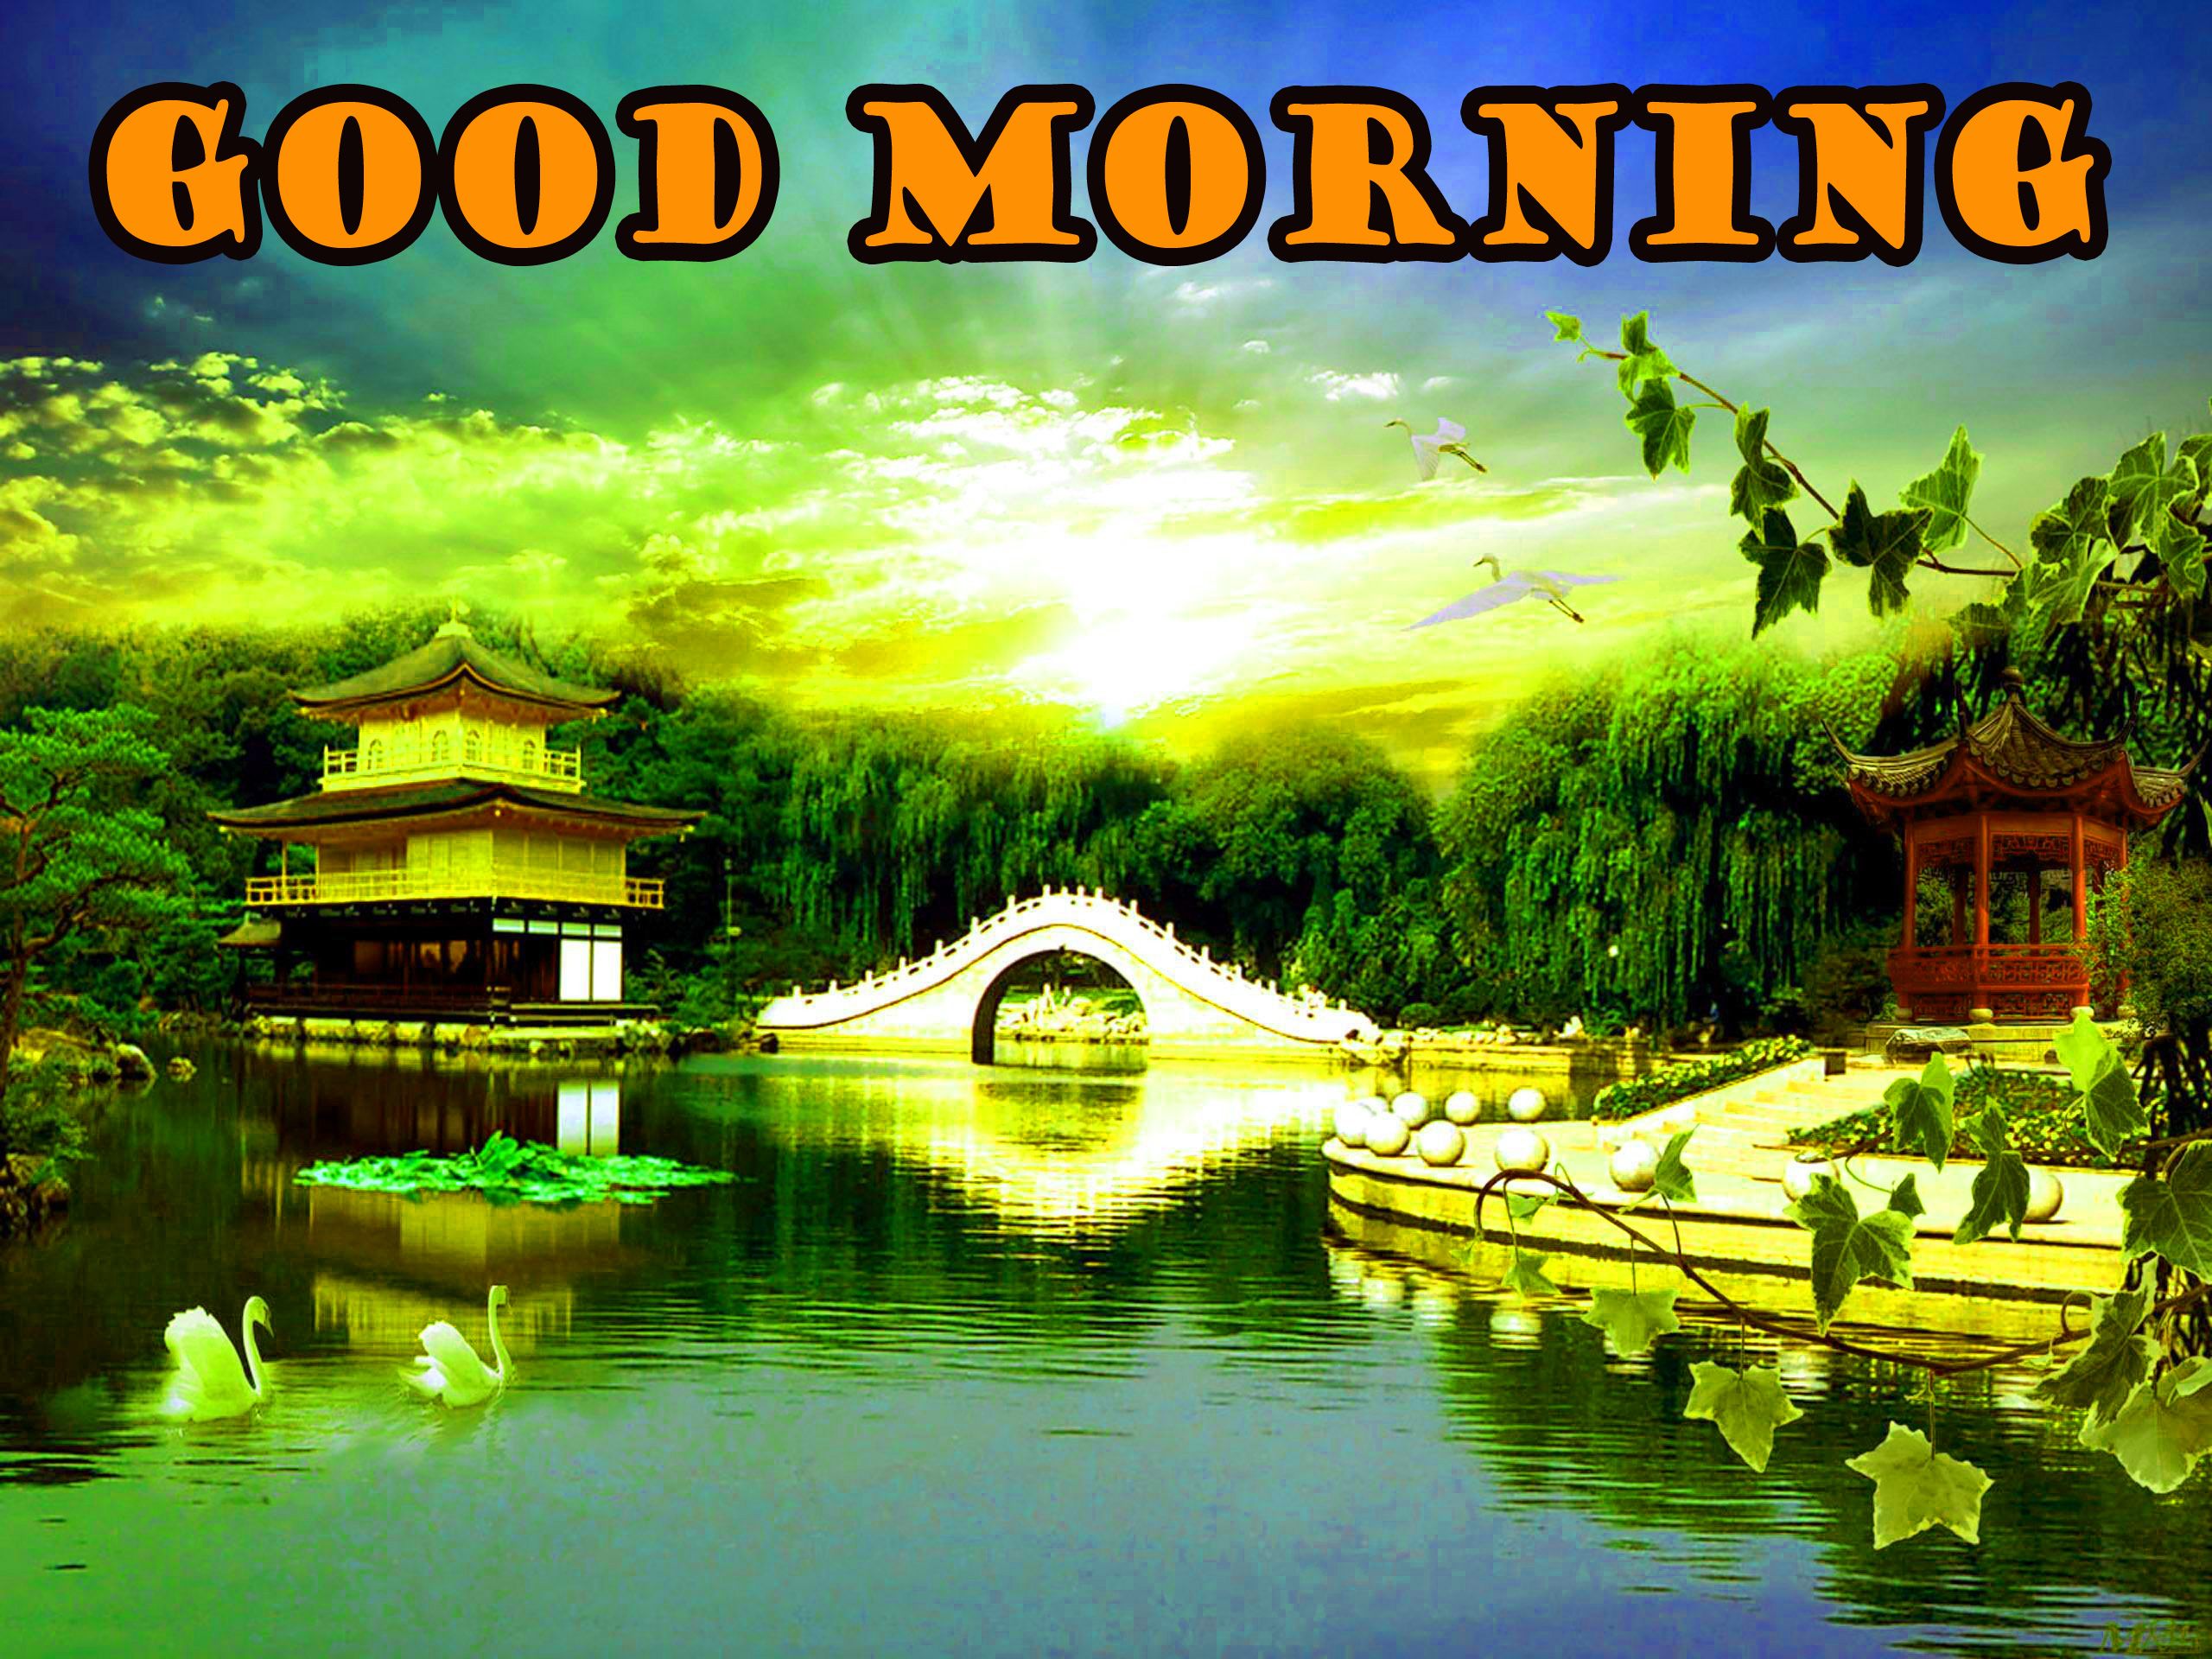 Good Morning Images Scenery - carrotapp